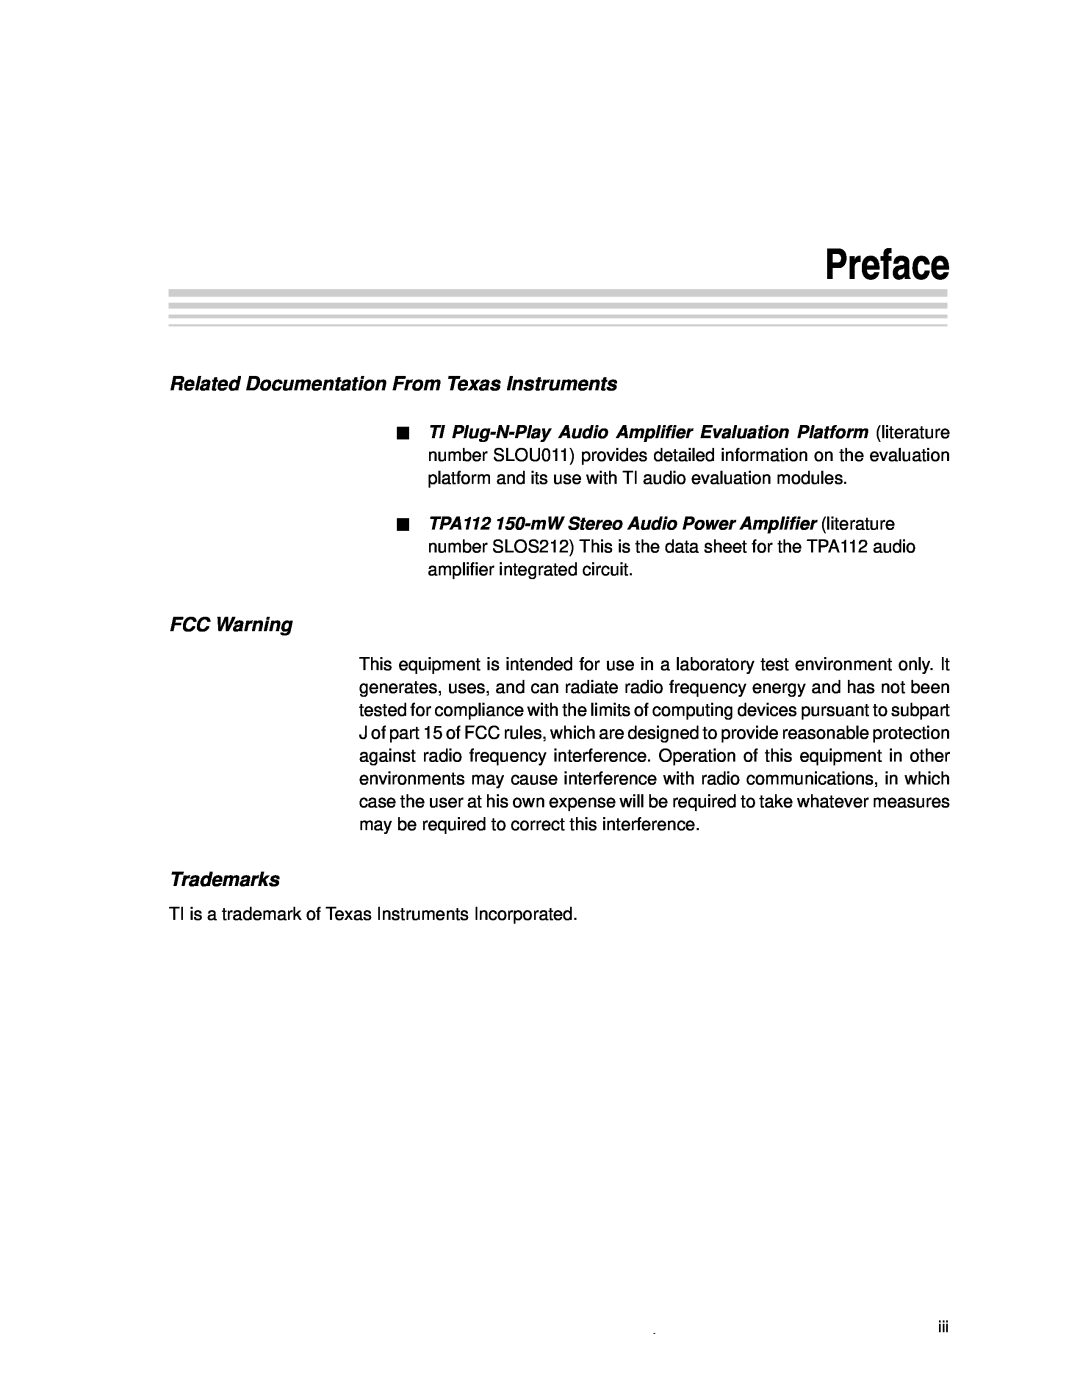 Texas Instruments SLOU023A manual Preface, Related Documentation FromJTexas Instruments, FCC Warning, Trademarks 